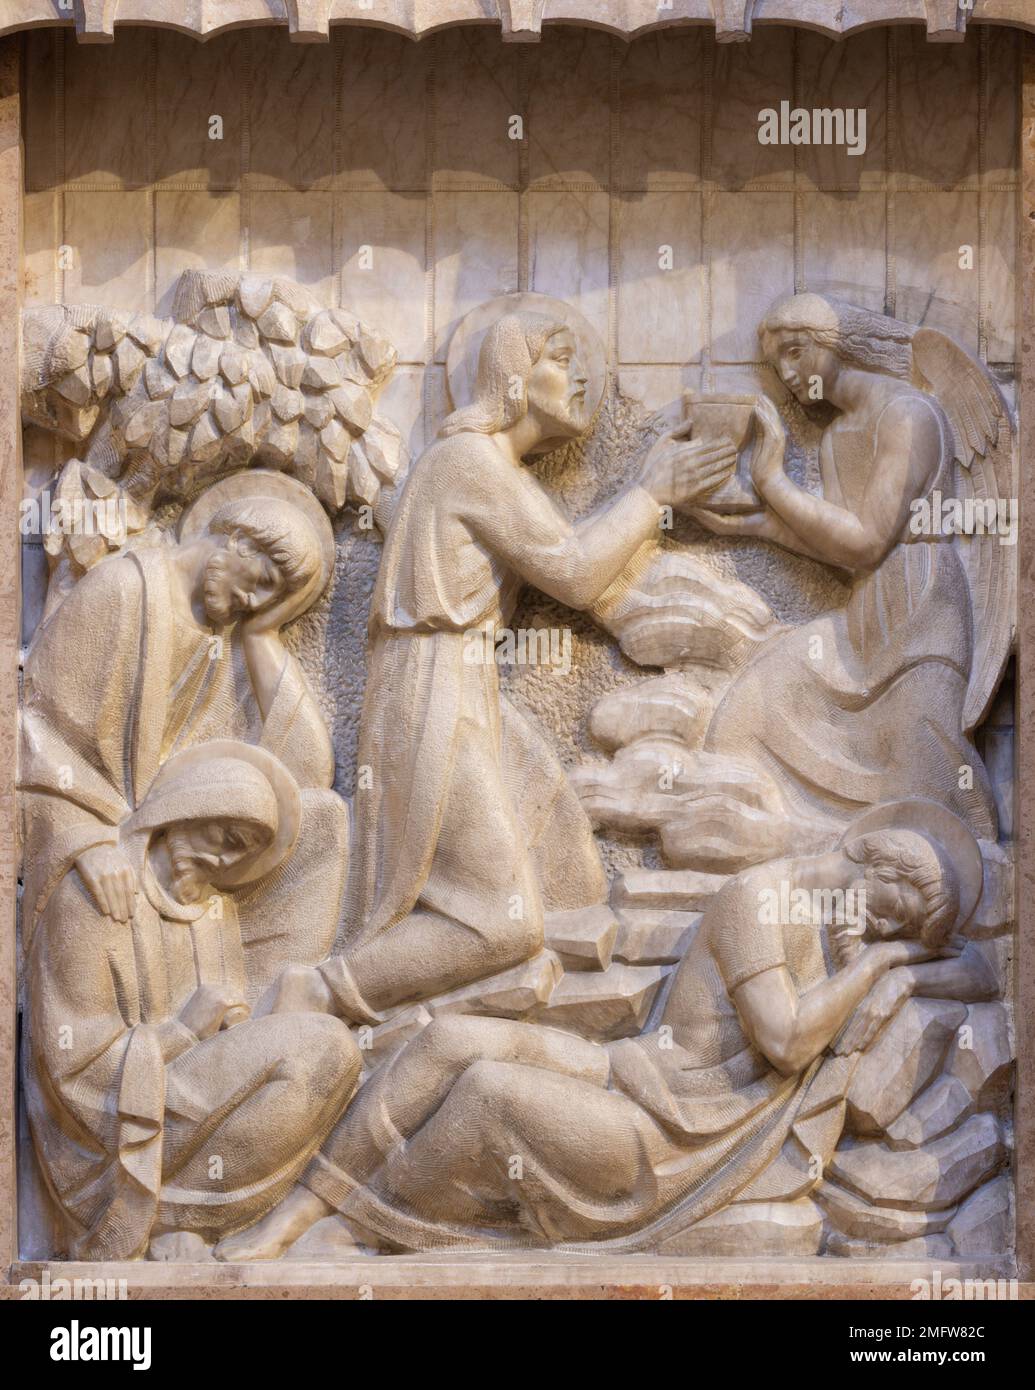 VALENCIA, SPAIN - FEBRUARY 17, 2022: The marble relief of Jesus prayer in Gethsemana garden in the church Basilica de San Vicente Ferrer from 20. cent Stock Photo